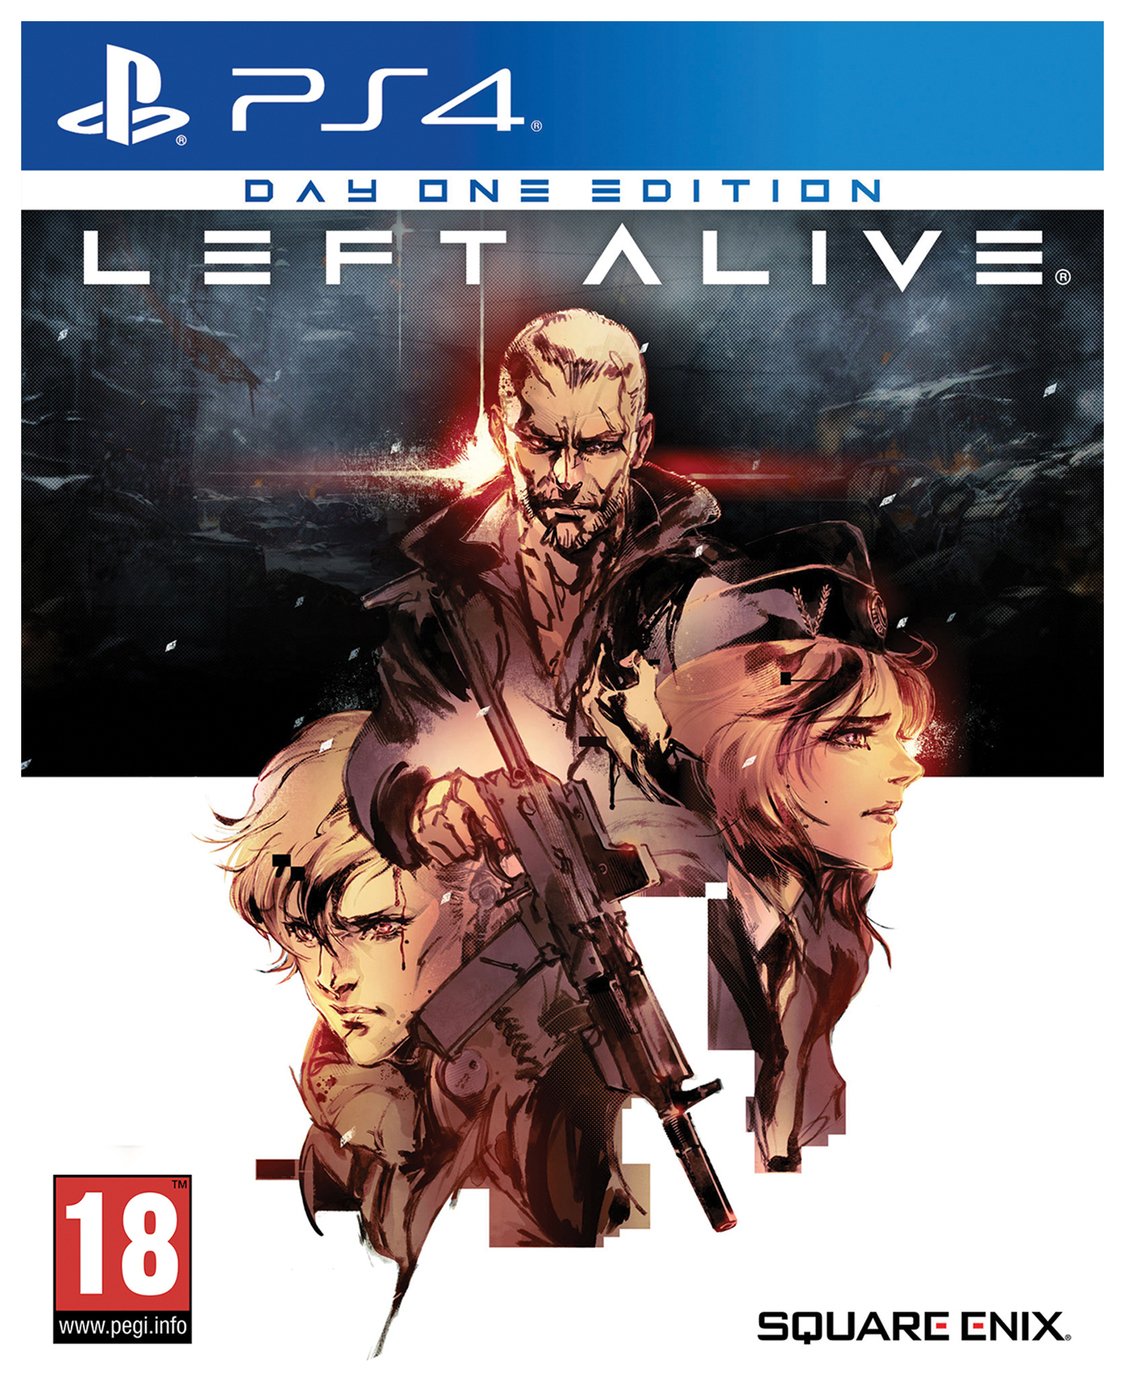 Left Alive: Day One Edition PS4 Game review